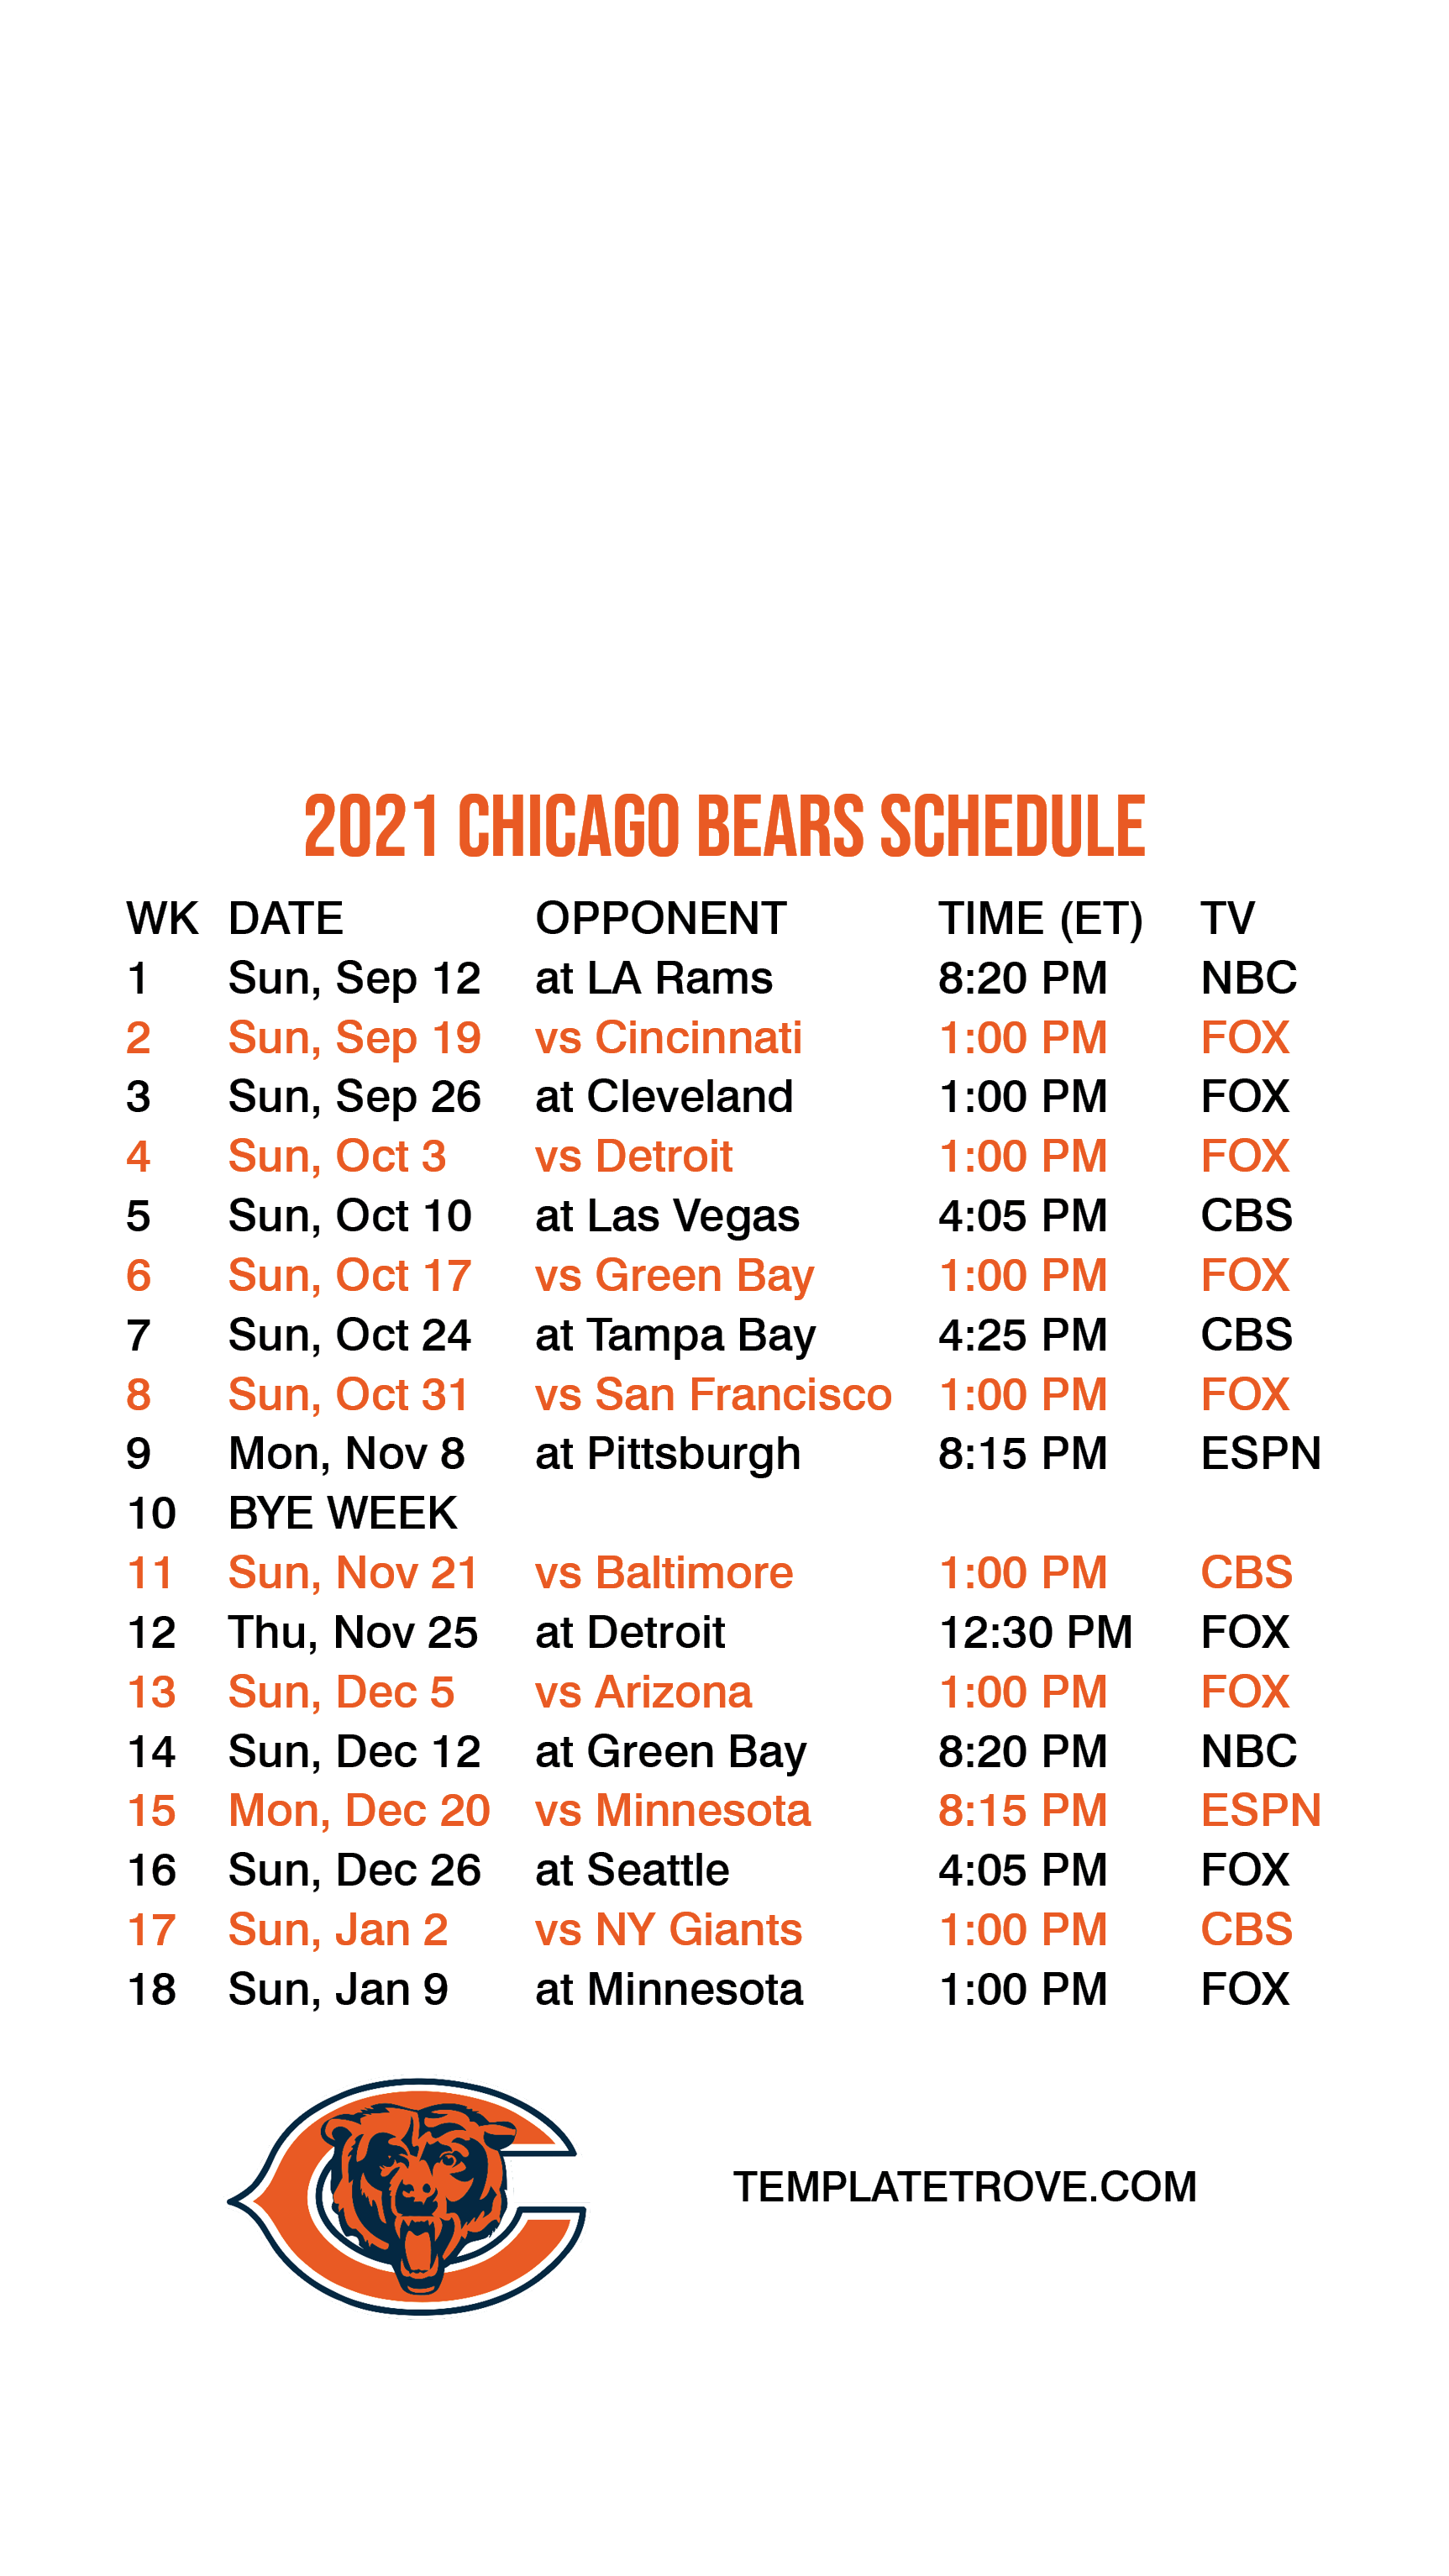 2021-2022 Chicago Bears Lock Screen Schedule for iPhone 6-7-8 Plus